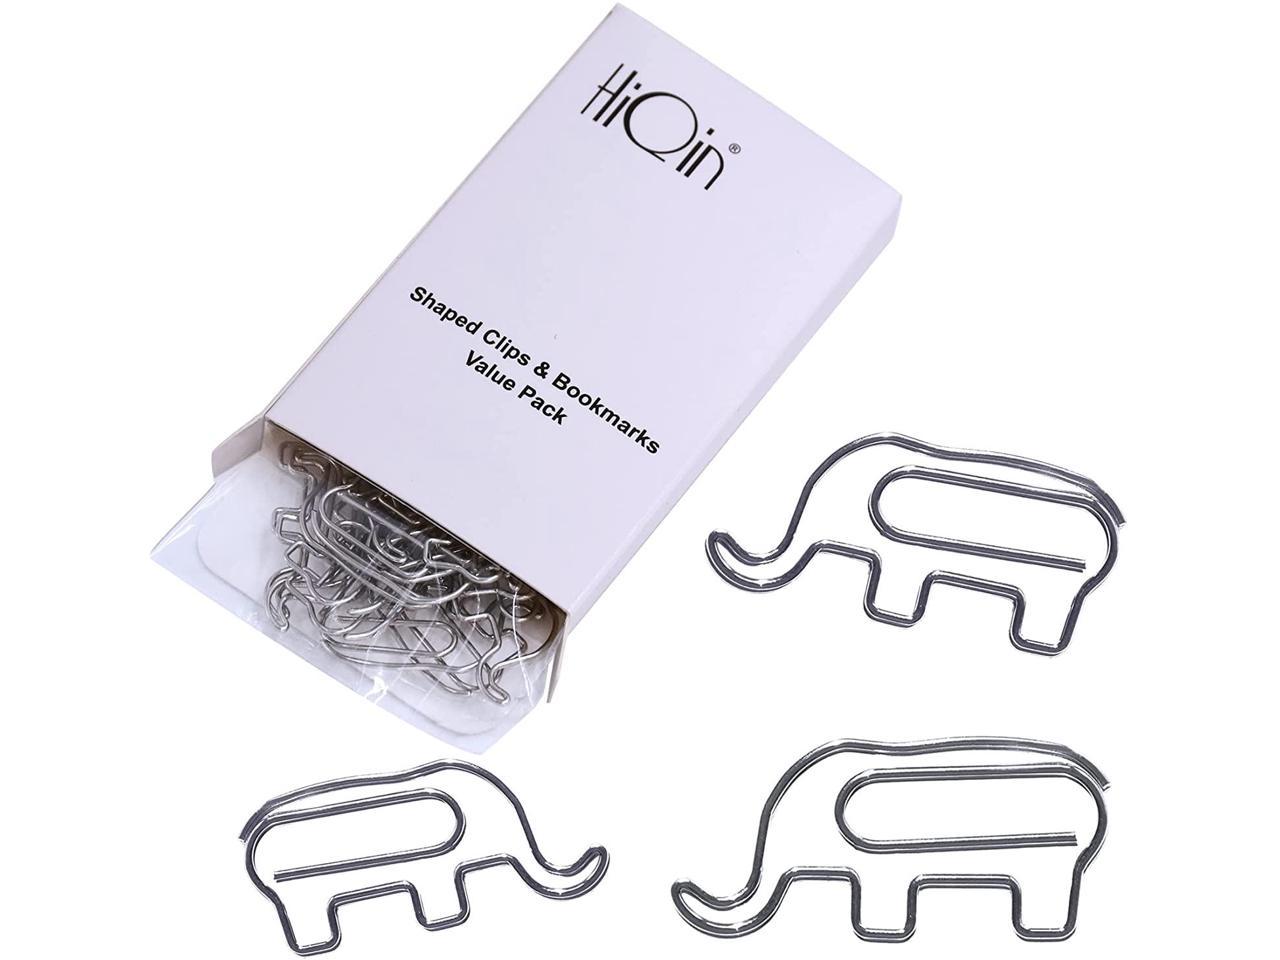 Elephant Shape Bookmark Silver Plated Metal Stationery Reading Accessory 